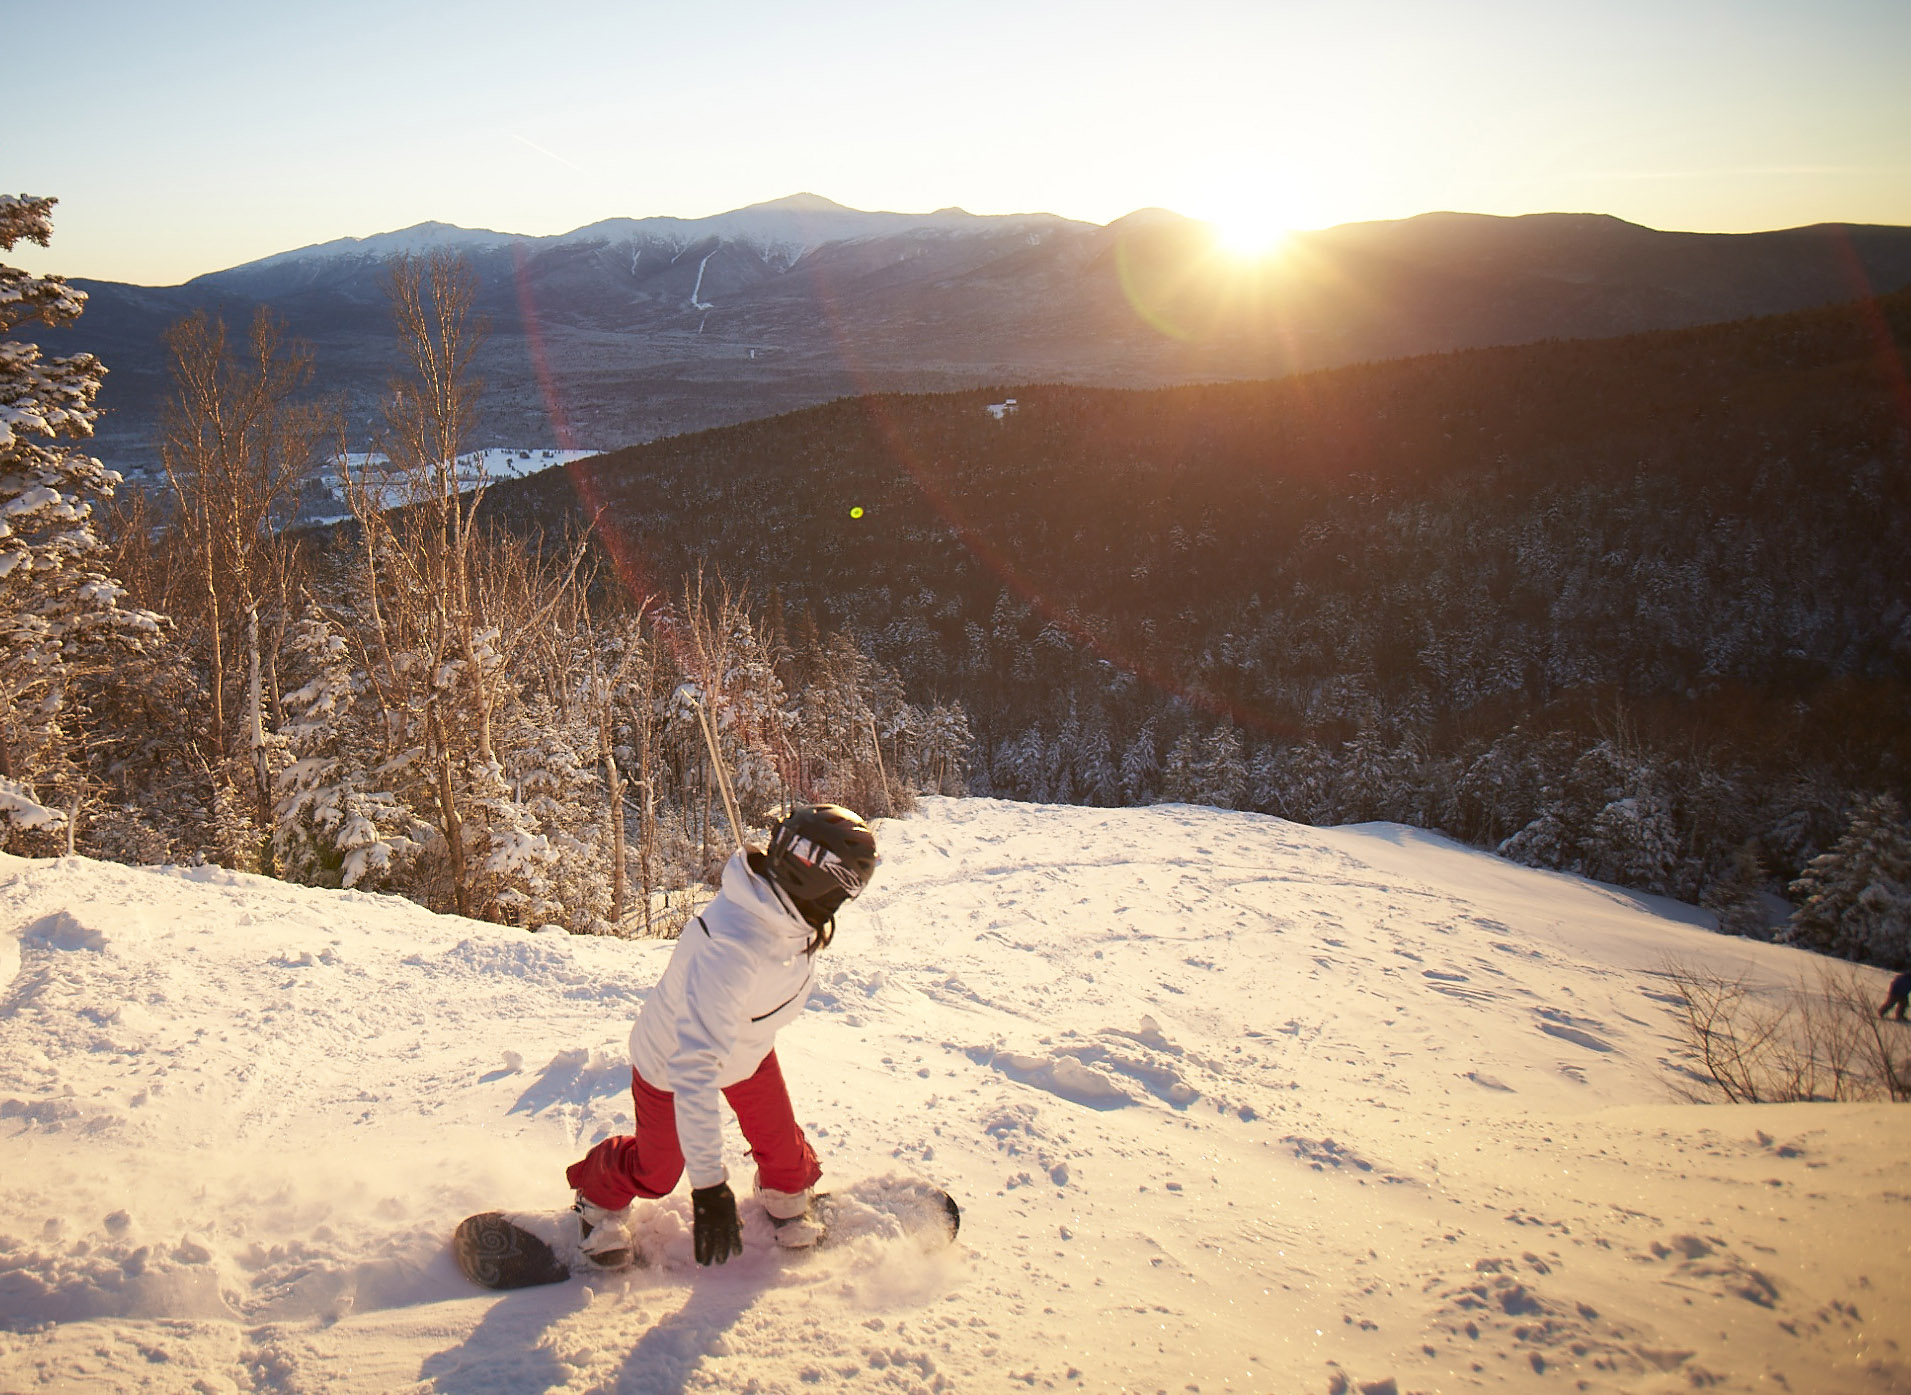 a snowboarder at sunset